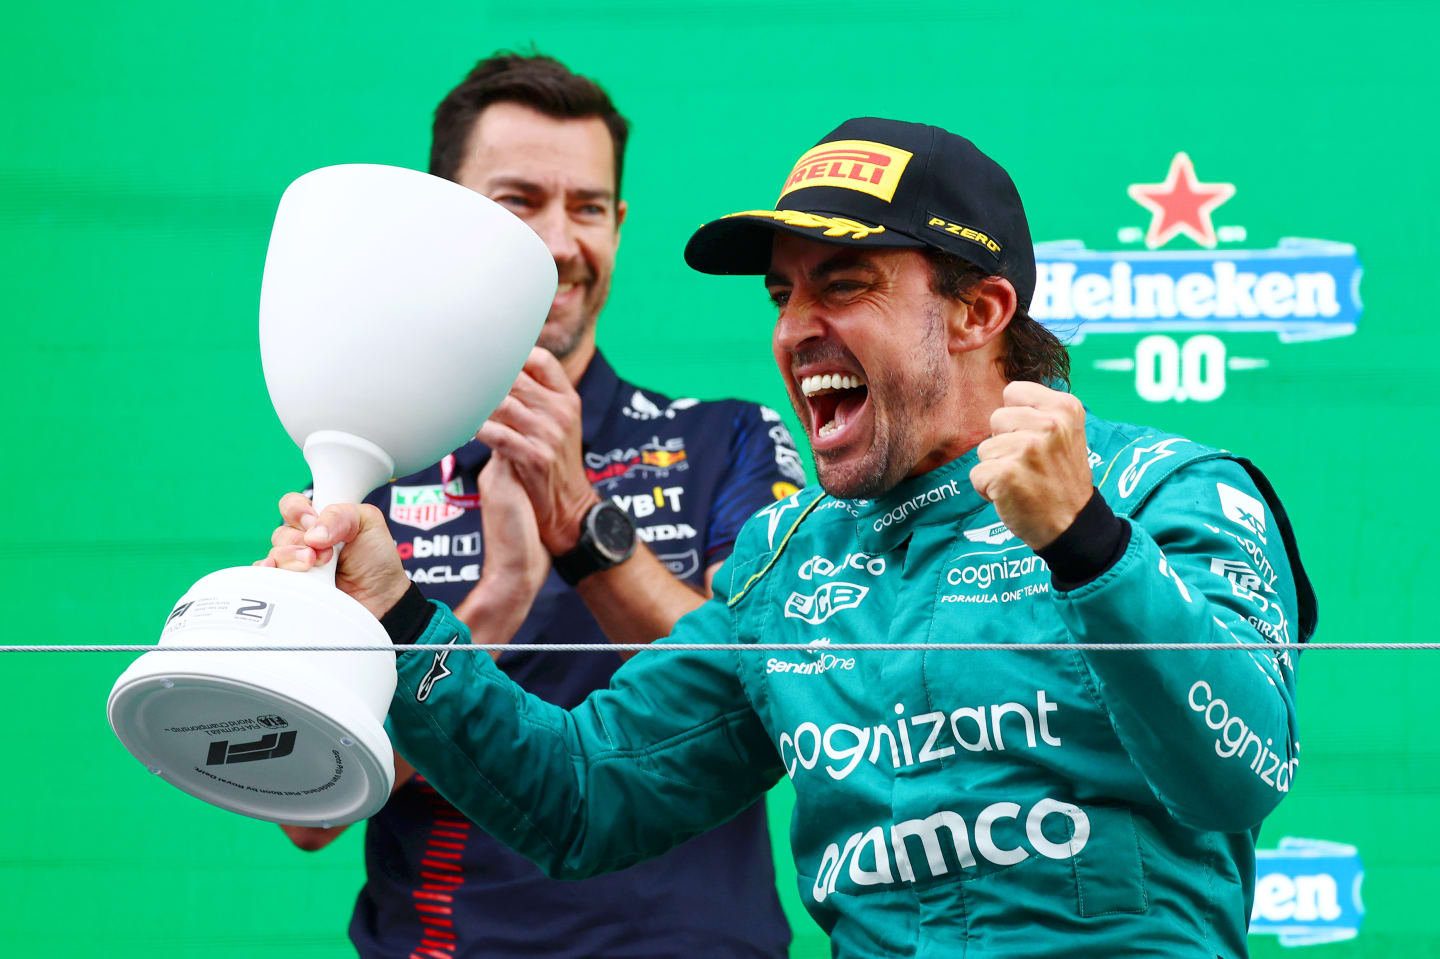 ZANDVOORT, NETHERLANDS - AUGUST 27: Second placed Fernando Alonso of Spain and Aston Martin F1 Team celebrates on the podium during the F1 Grand Prix of The Netherlands at Circuit Zandvoort on August 27, 2023 in Zandvoort, Netherlands. (Photo by Mark Thompson/Getty Images)